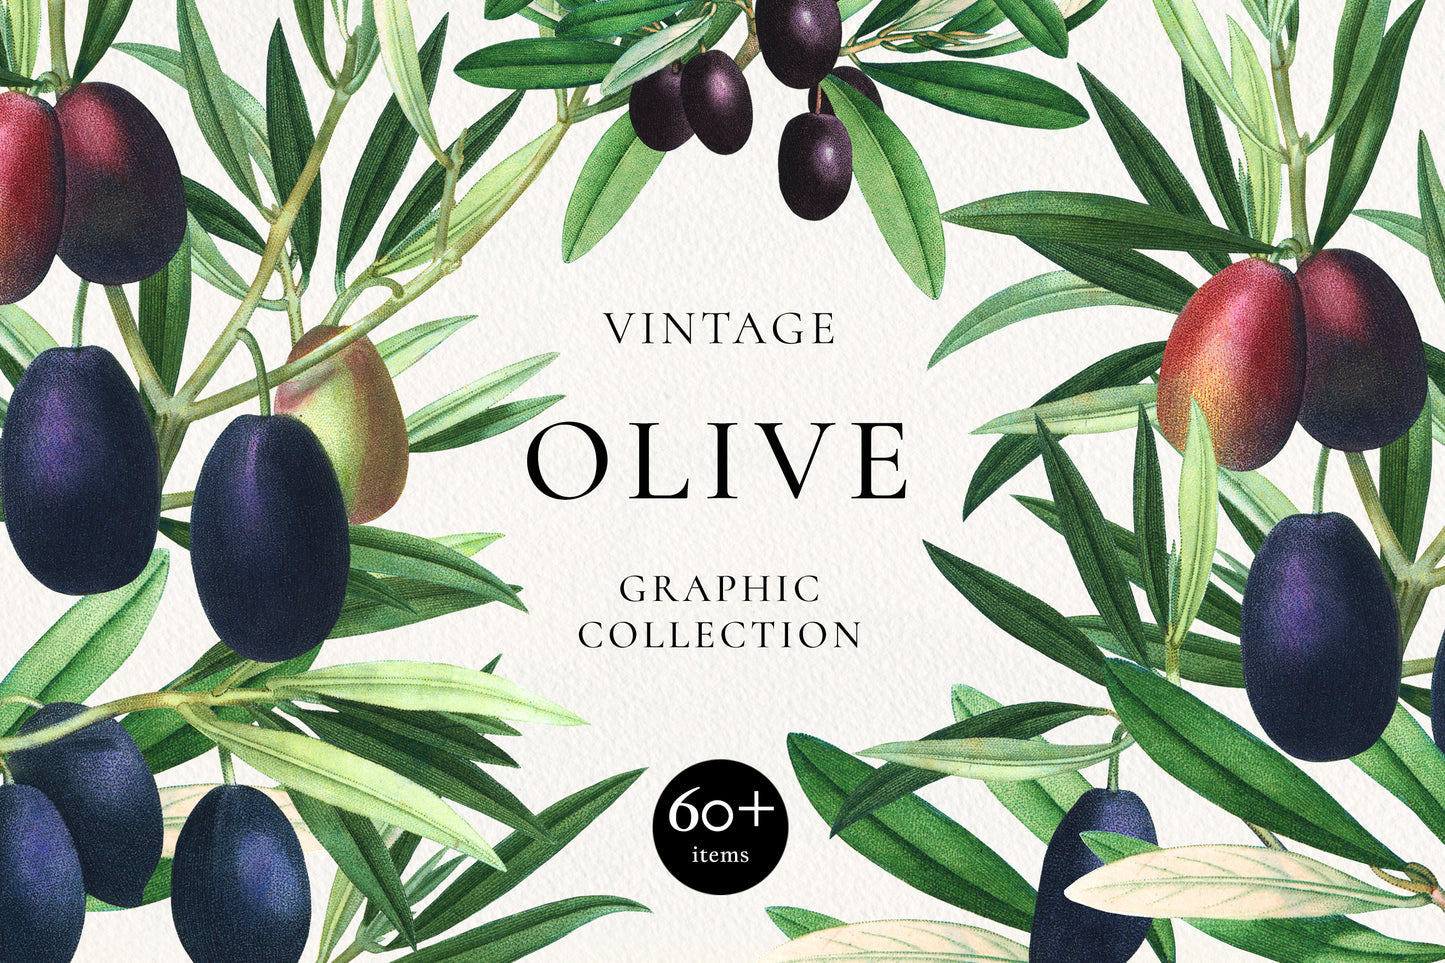 VINTAGE OLIVE Graphic Collection